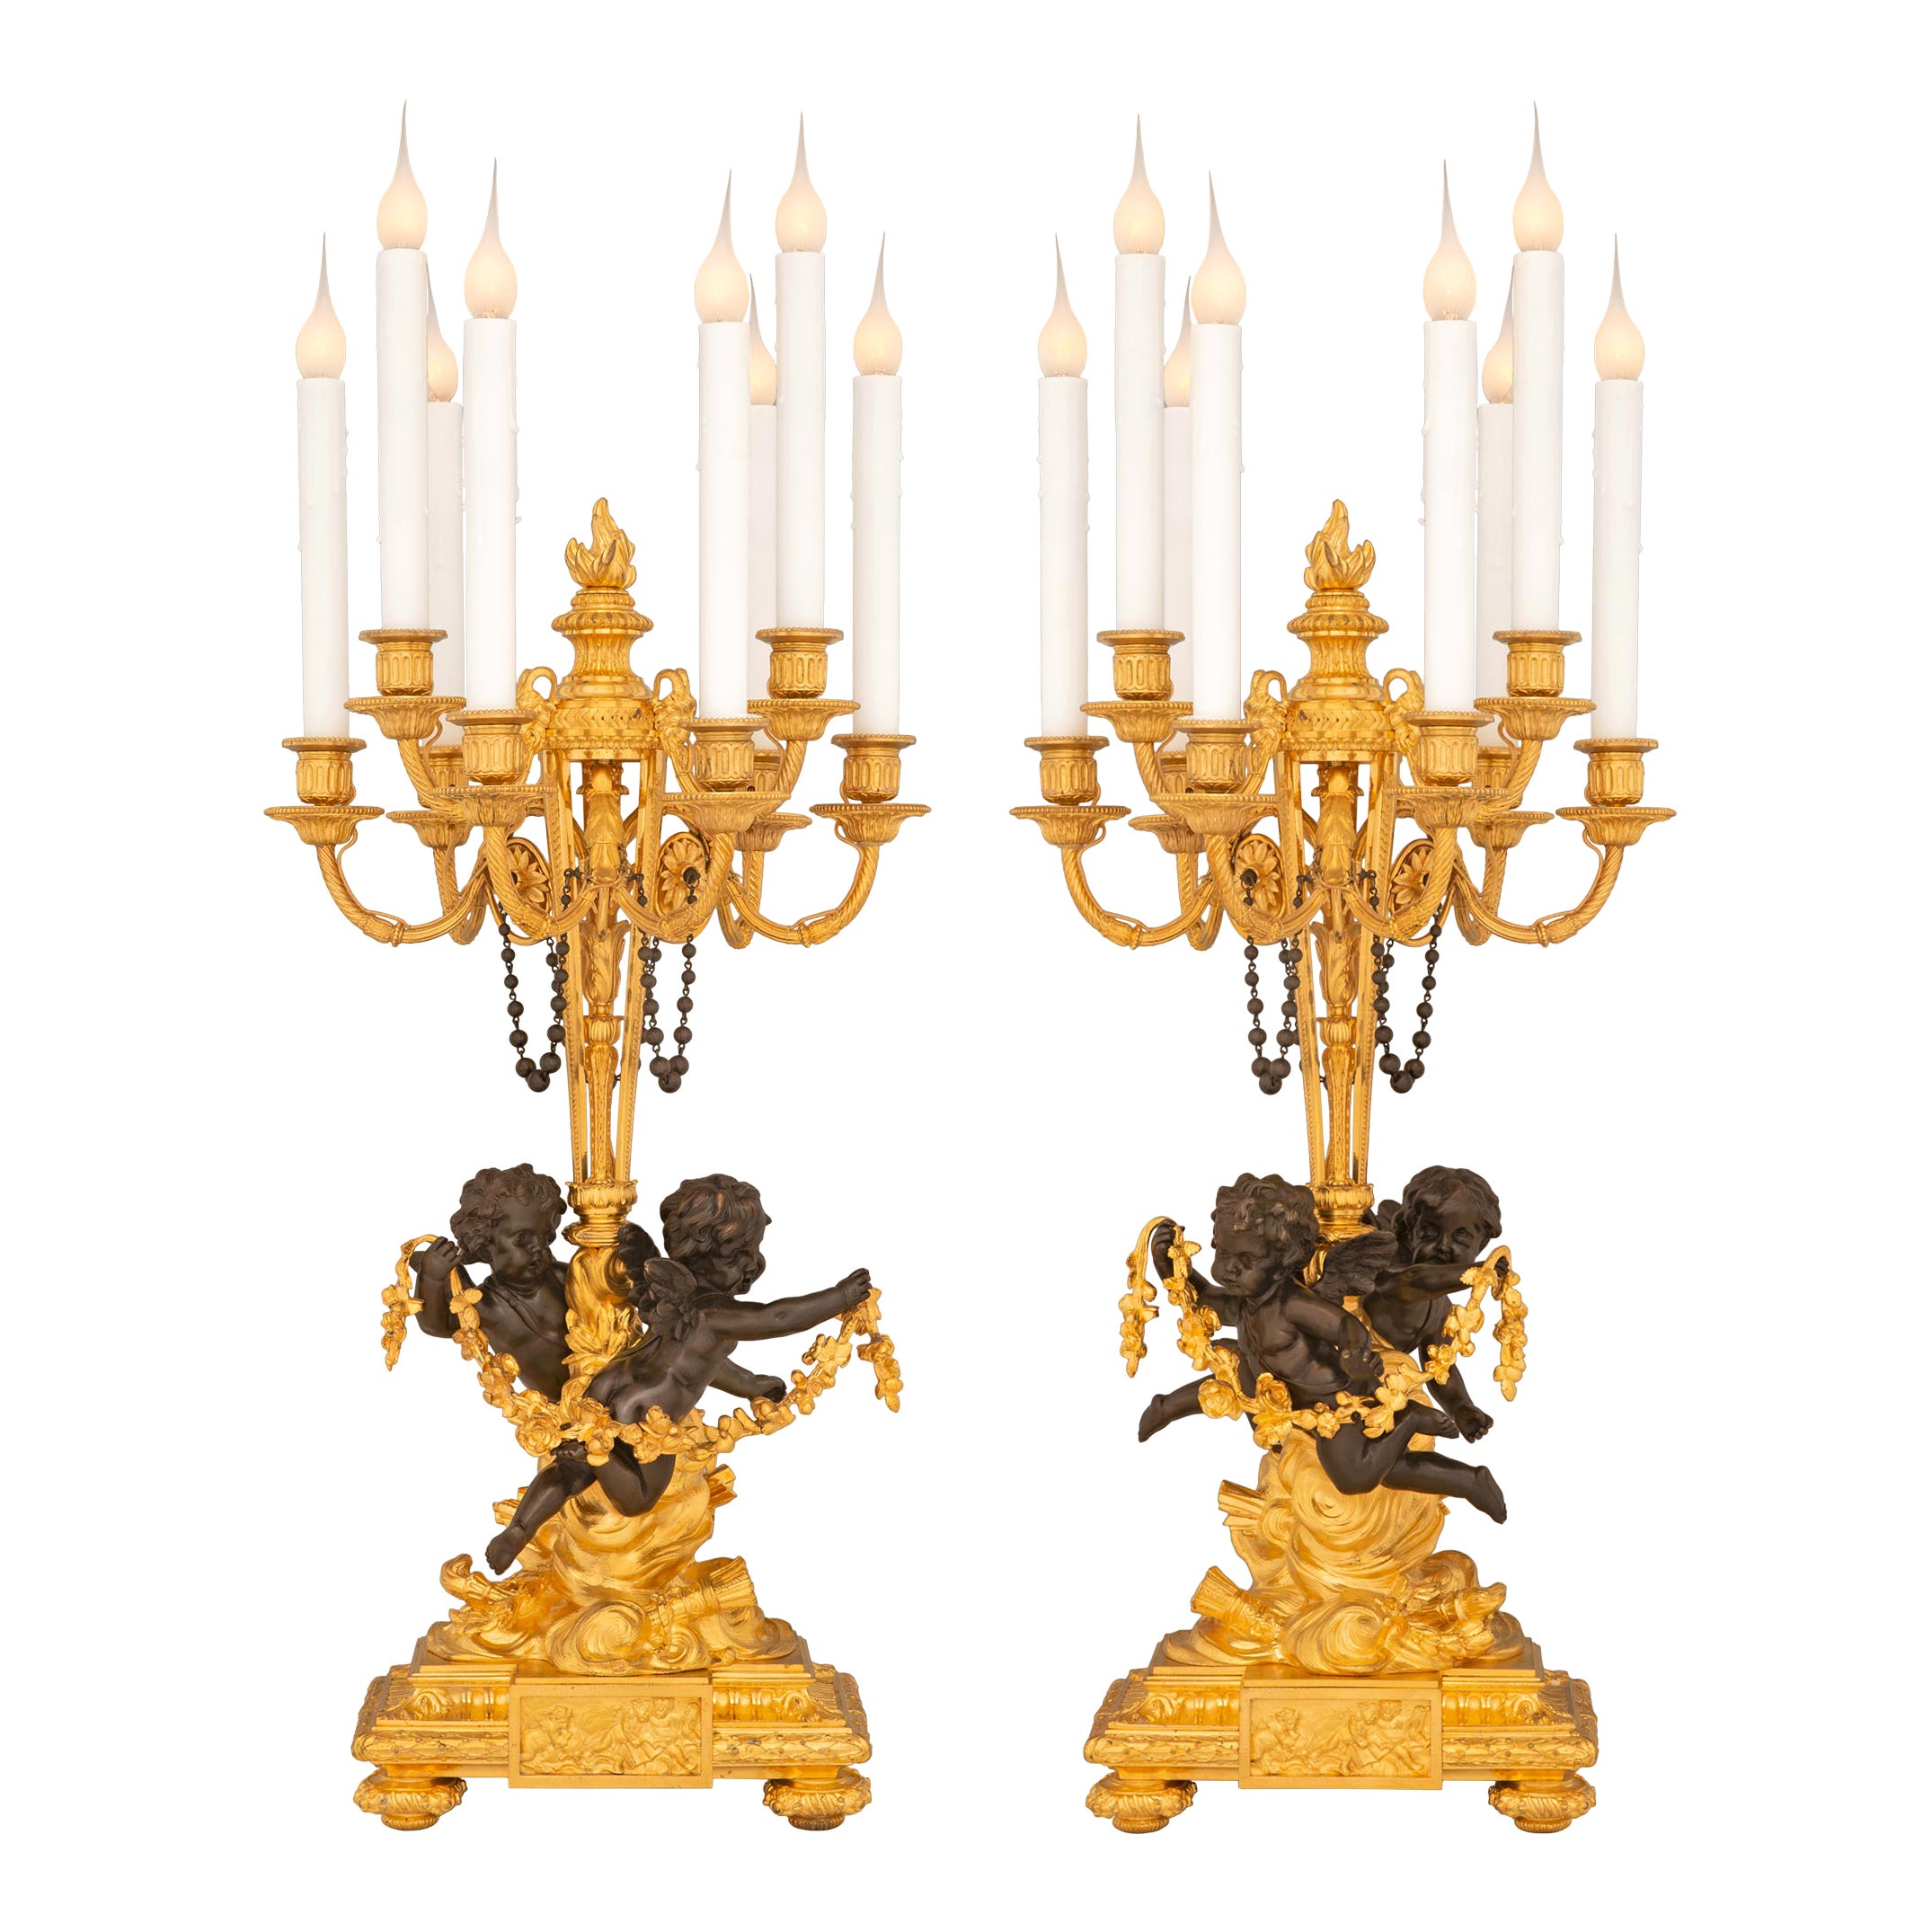 True Pair of French 19th Century Belle Époque Period Ormolu Candelabra Lamps For Sale